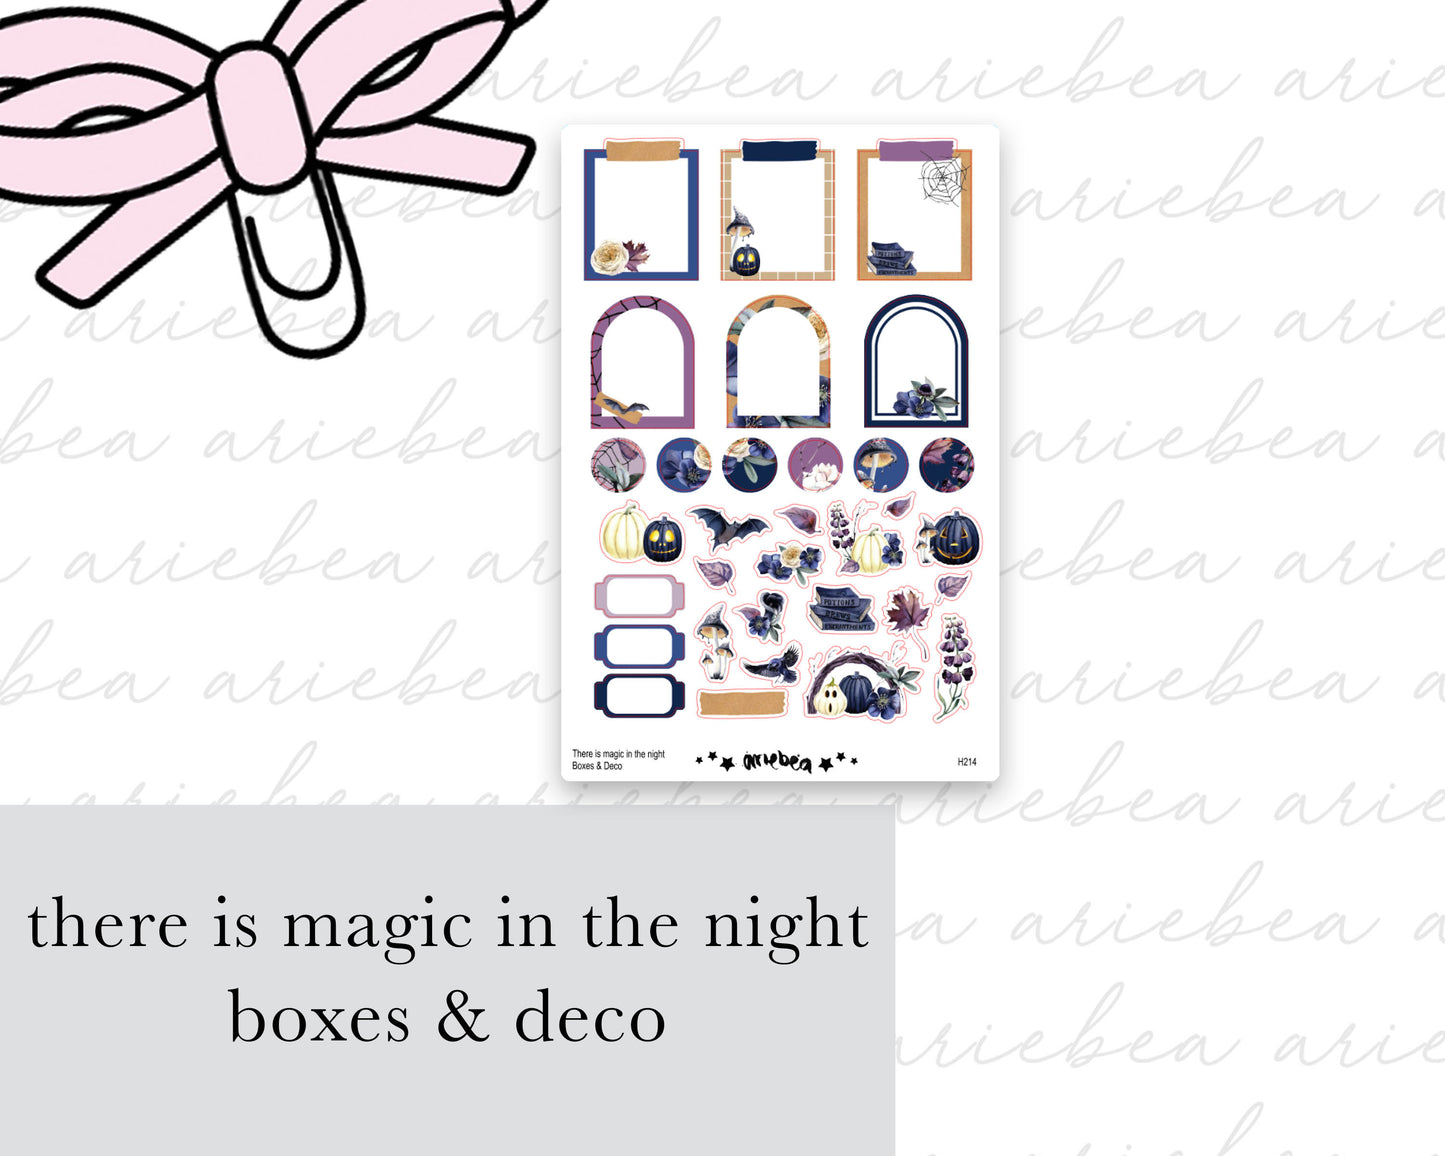 There is Magic in the Night Boxes & Deco